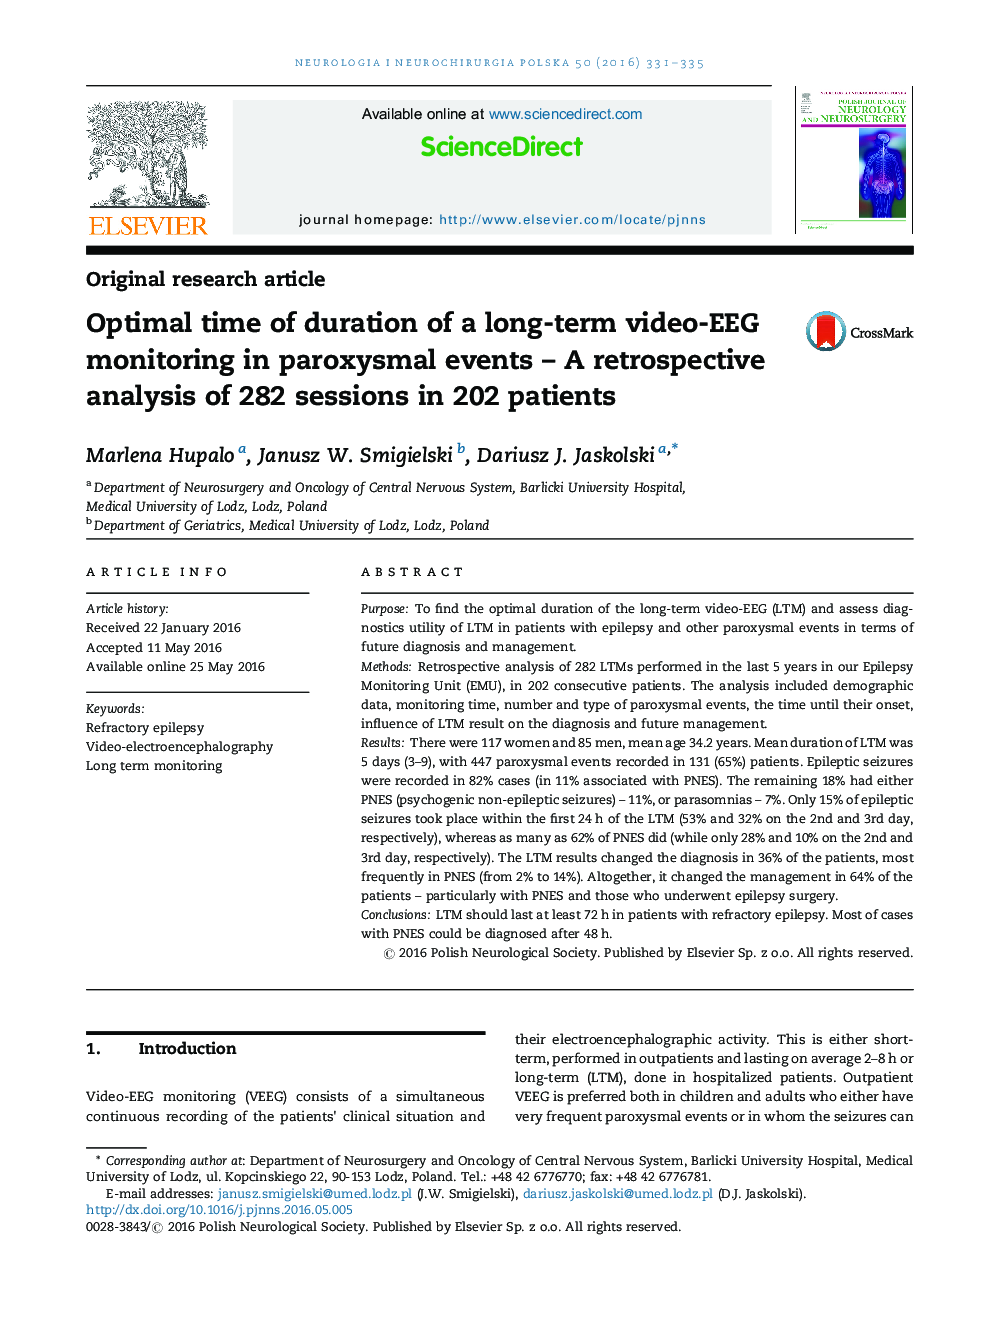 Optimal time of duration of a long-term video-EEG monitoring in paroxysmal events – A retrospective analysis of 282 sessions in 202 patients